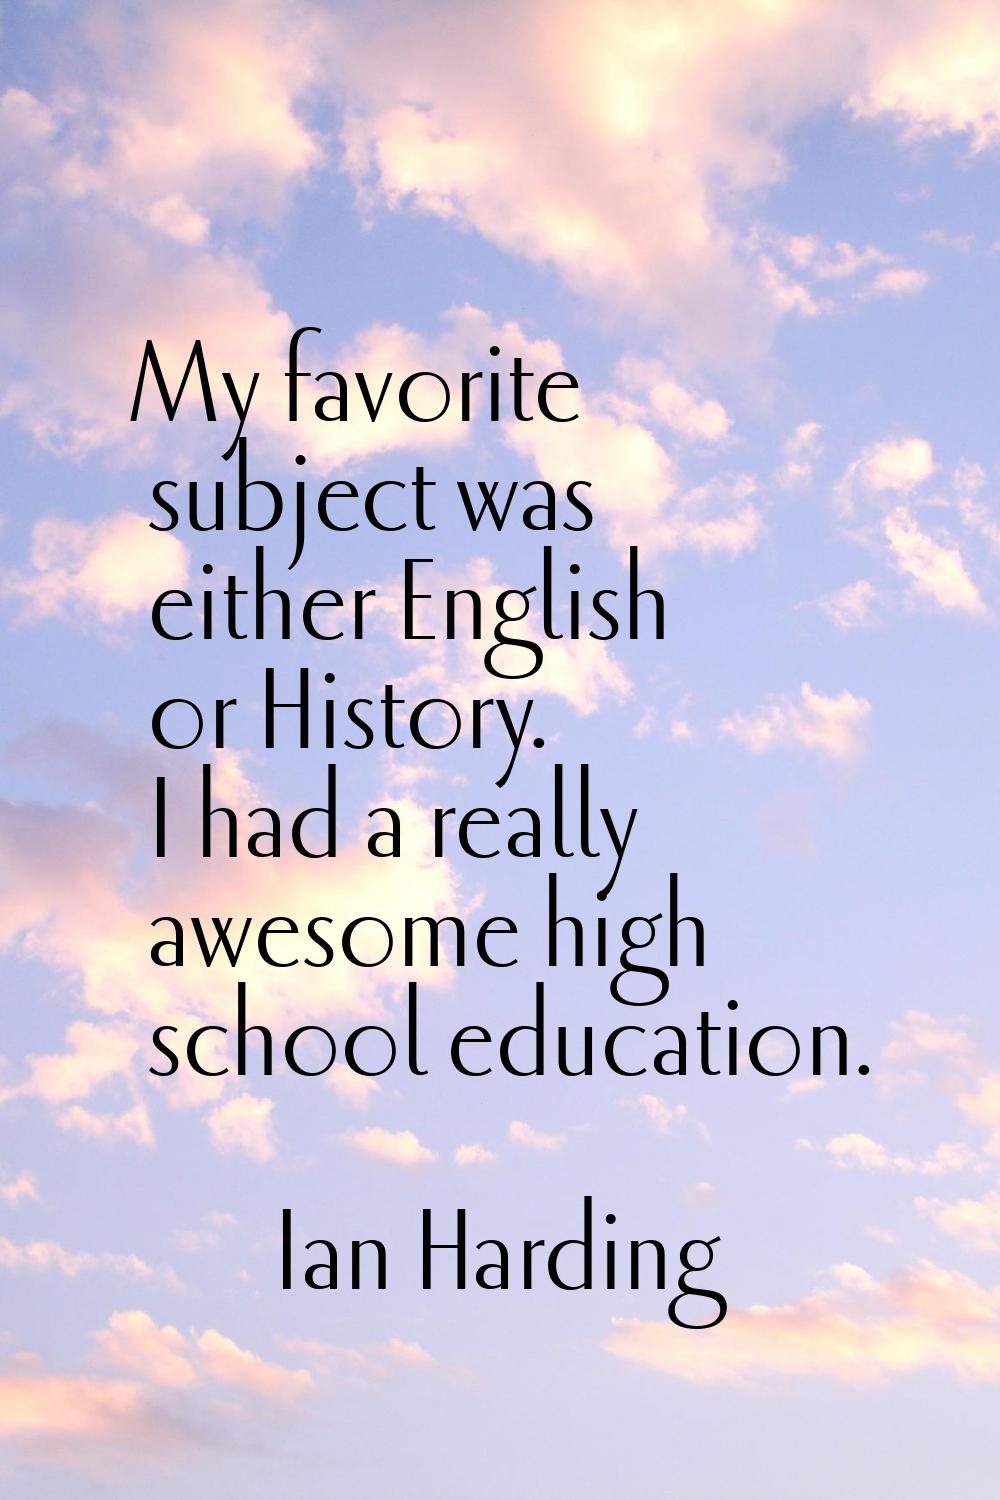 My favorite subject was either English or History. I had a really awesome high school education.